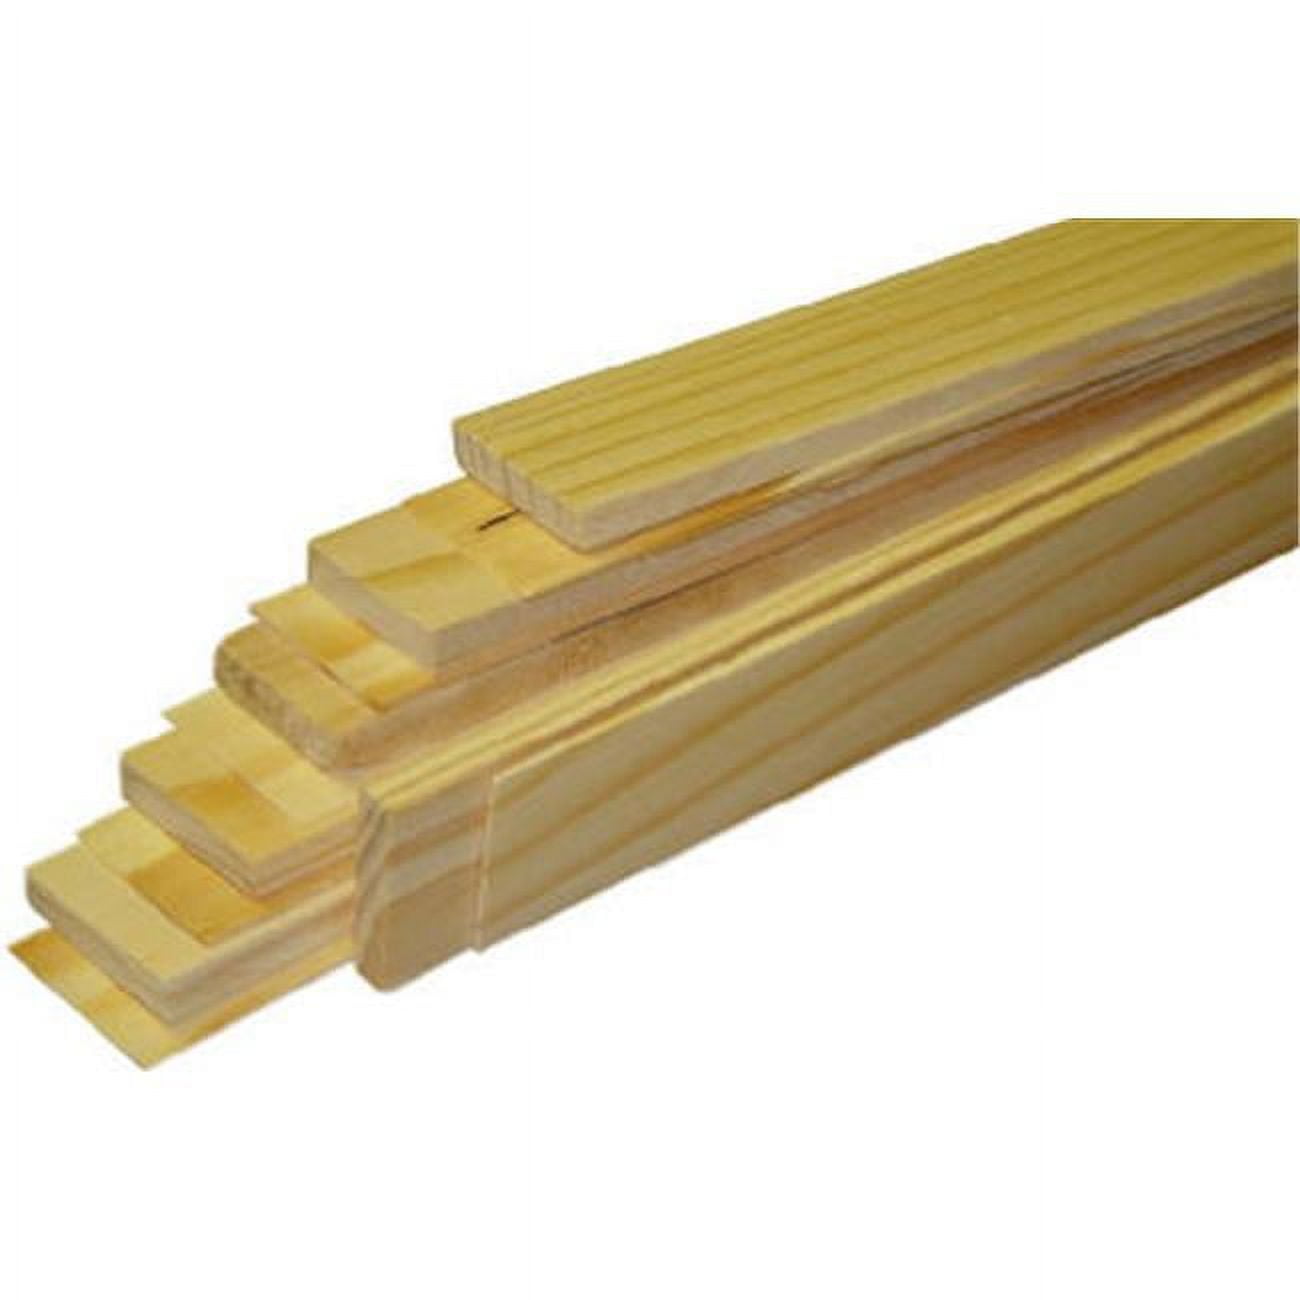 Nelson Wood Shims PSH12-12-48 12 in. Wood Shim- 12 Pack 